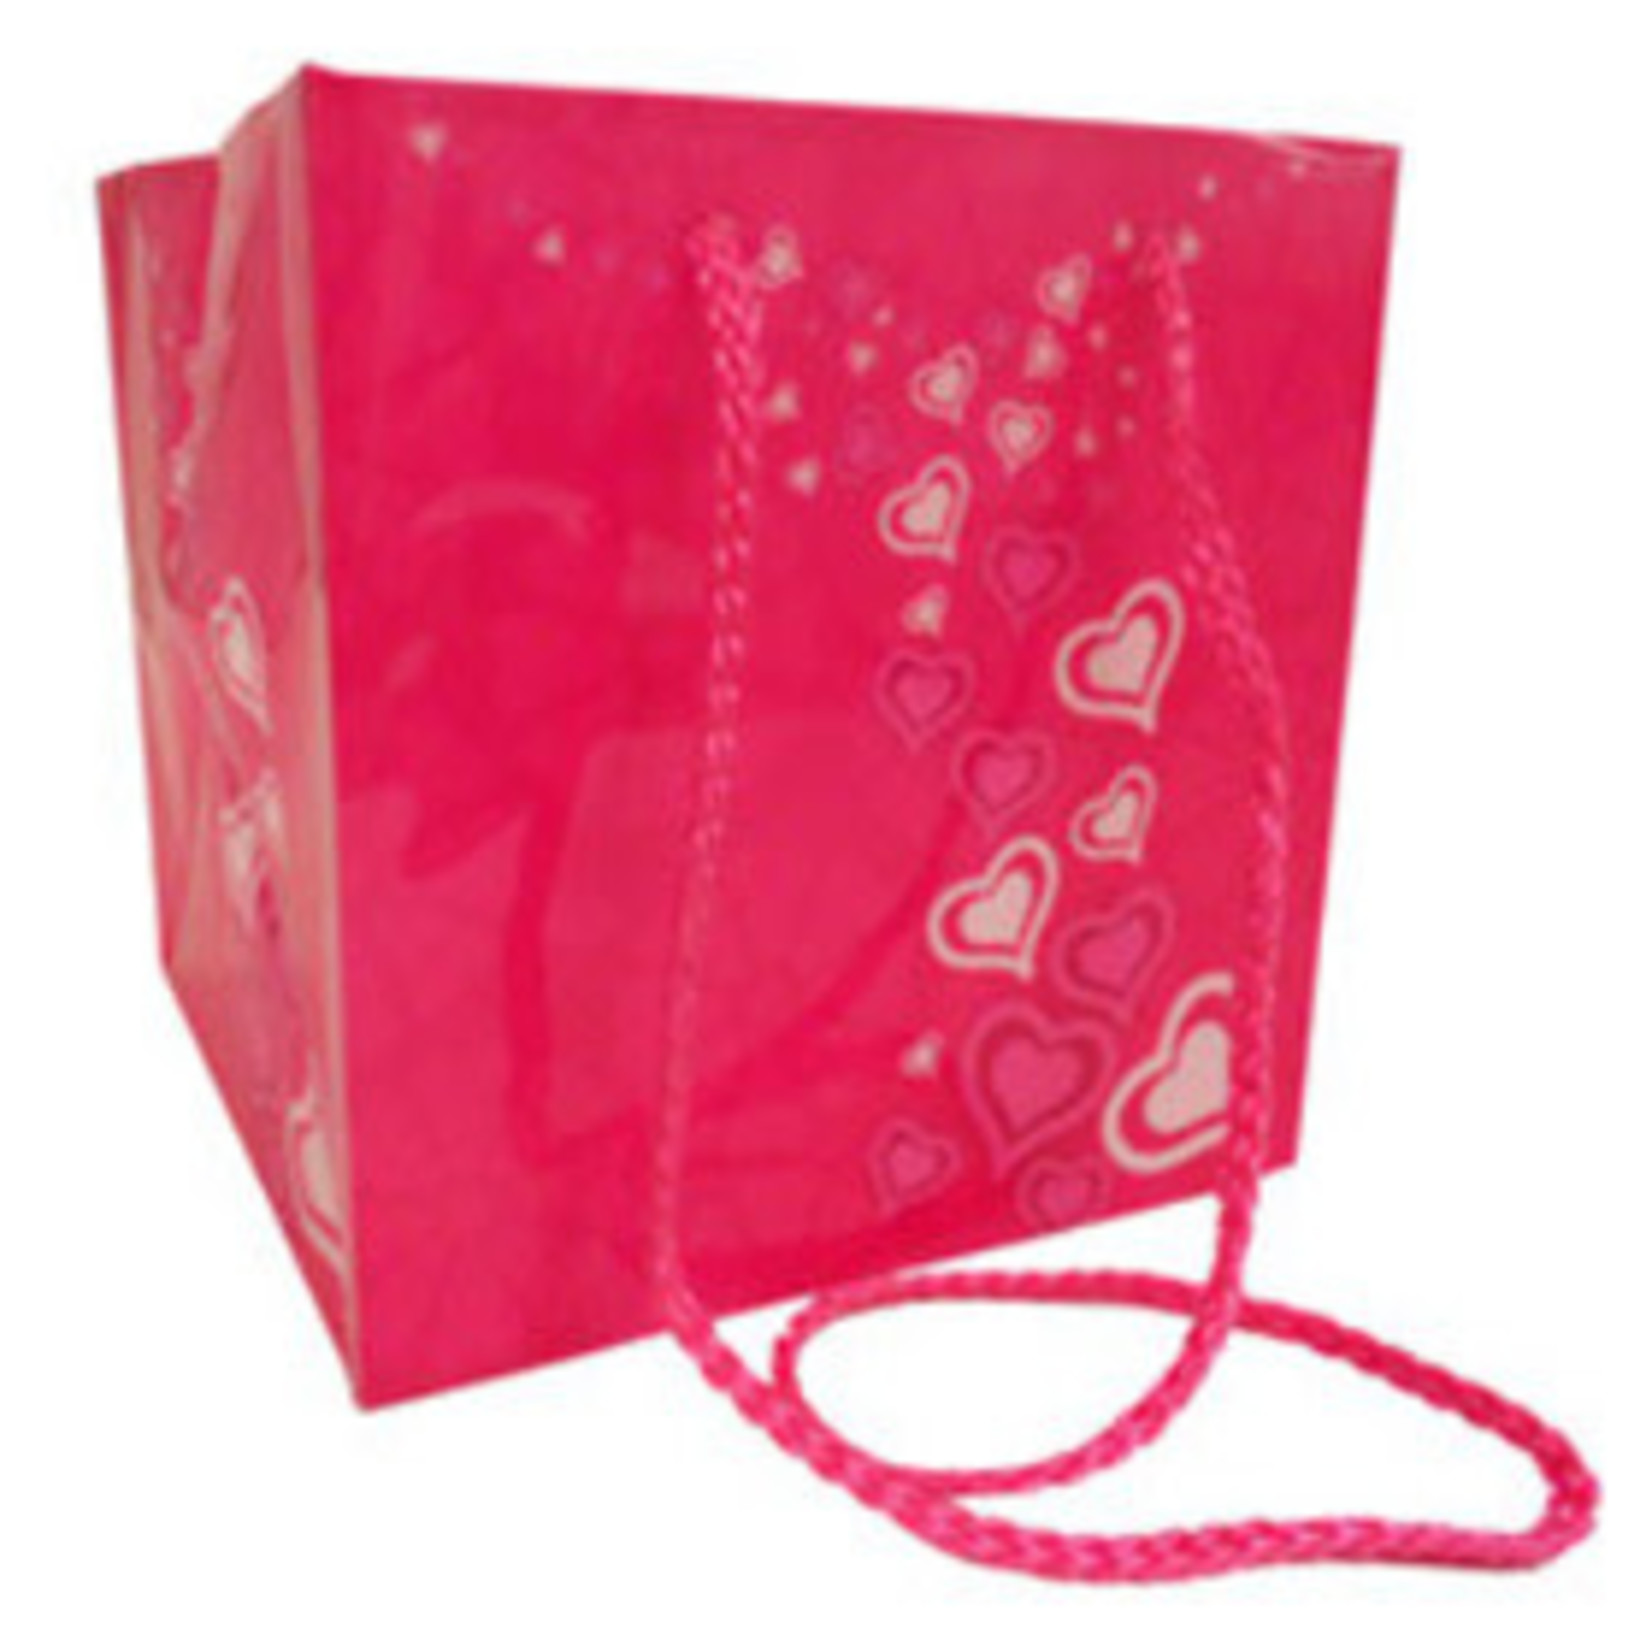 PINK or RED CARRYBAG 6.25 X 6.25'', 10 PCS